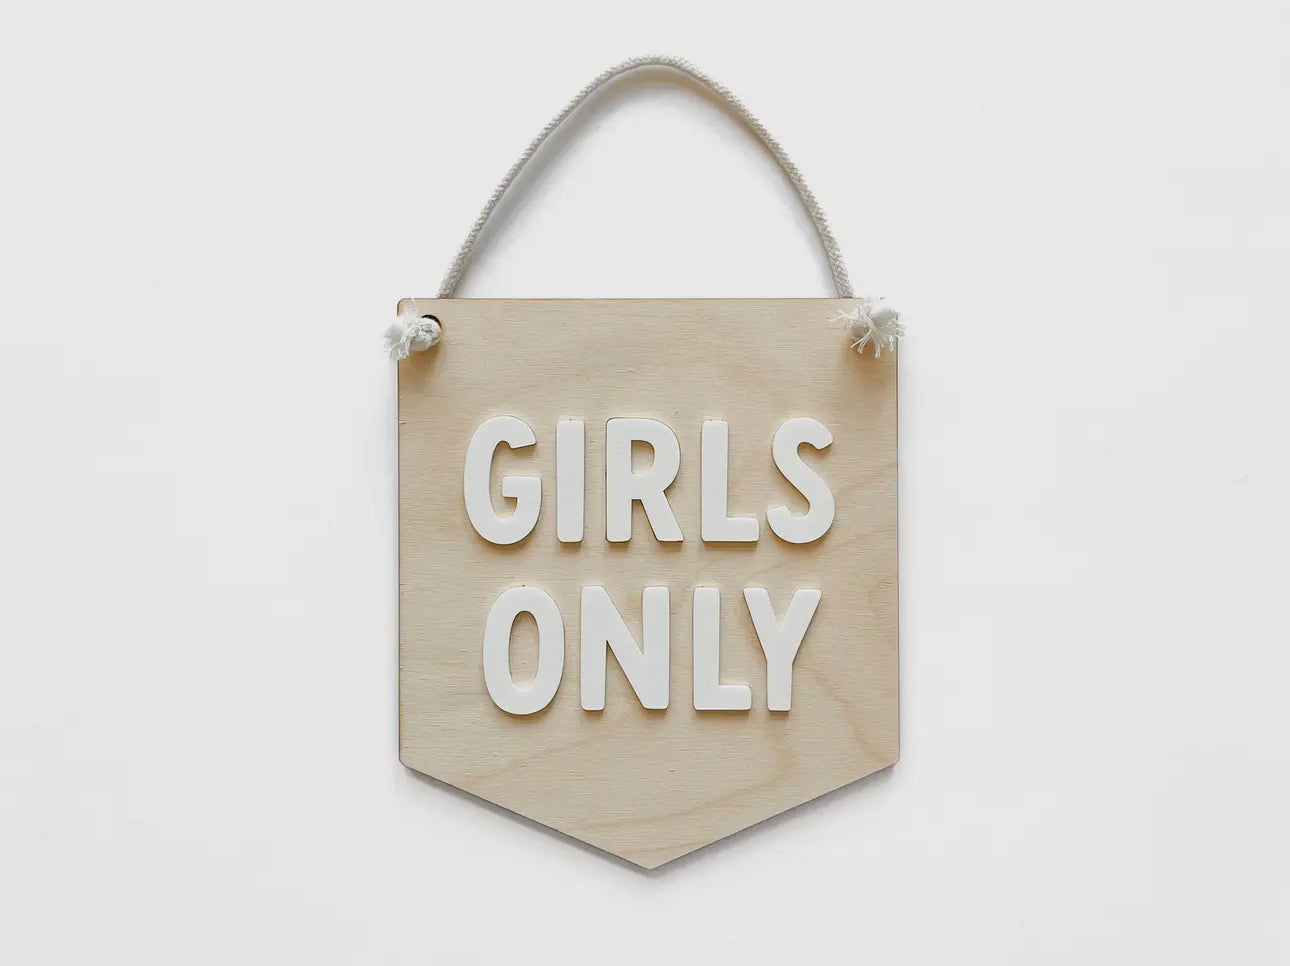 Girls only room sign